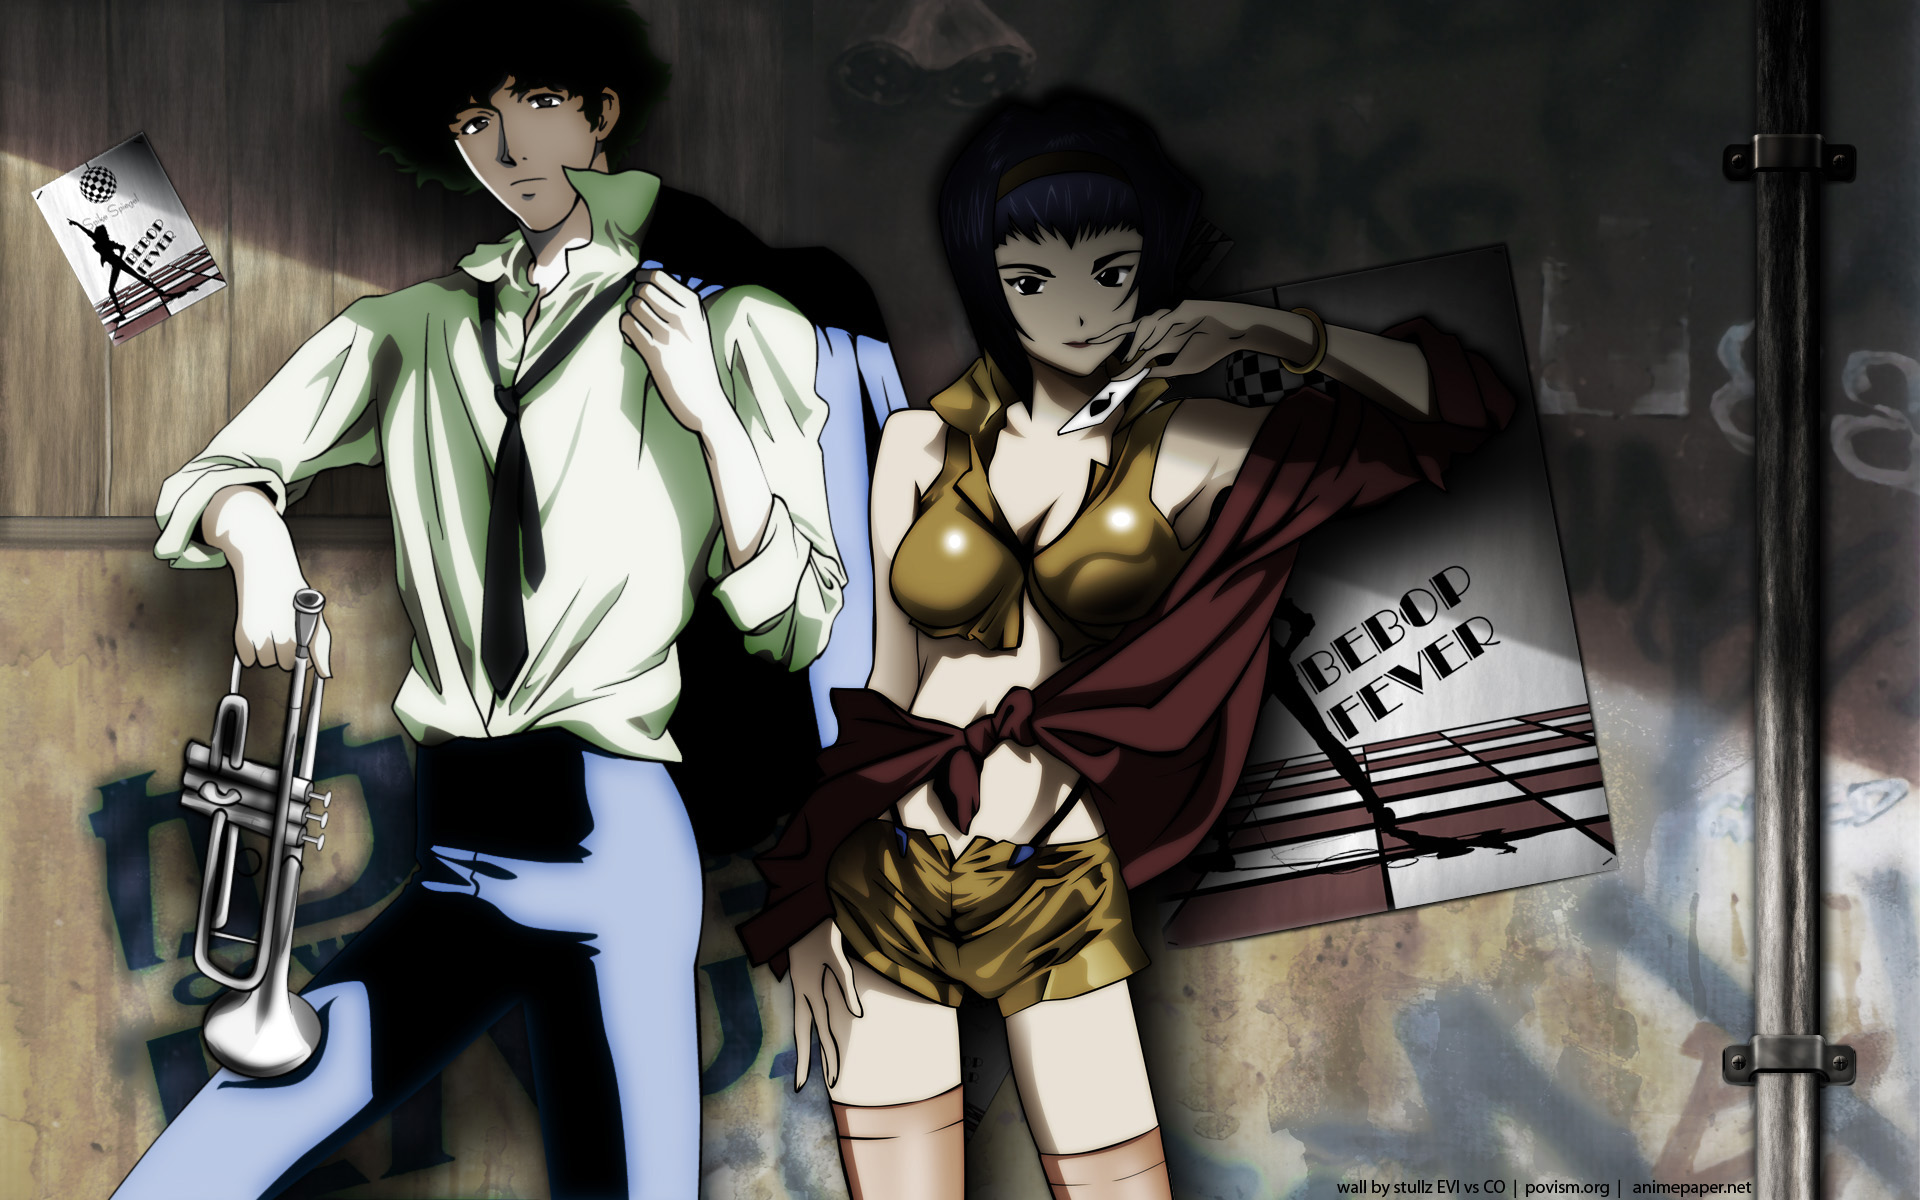 Spike Spiegel and Faye Valentine, characters from a popular anime series.